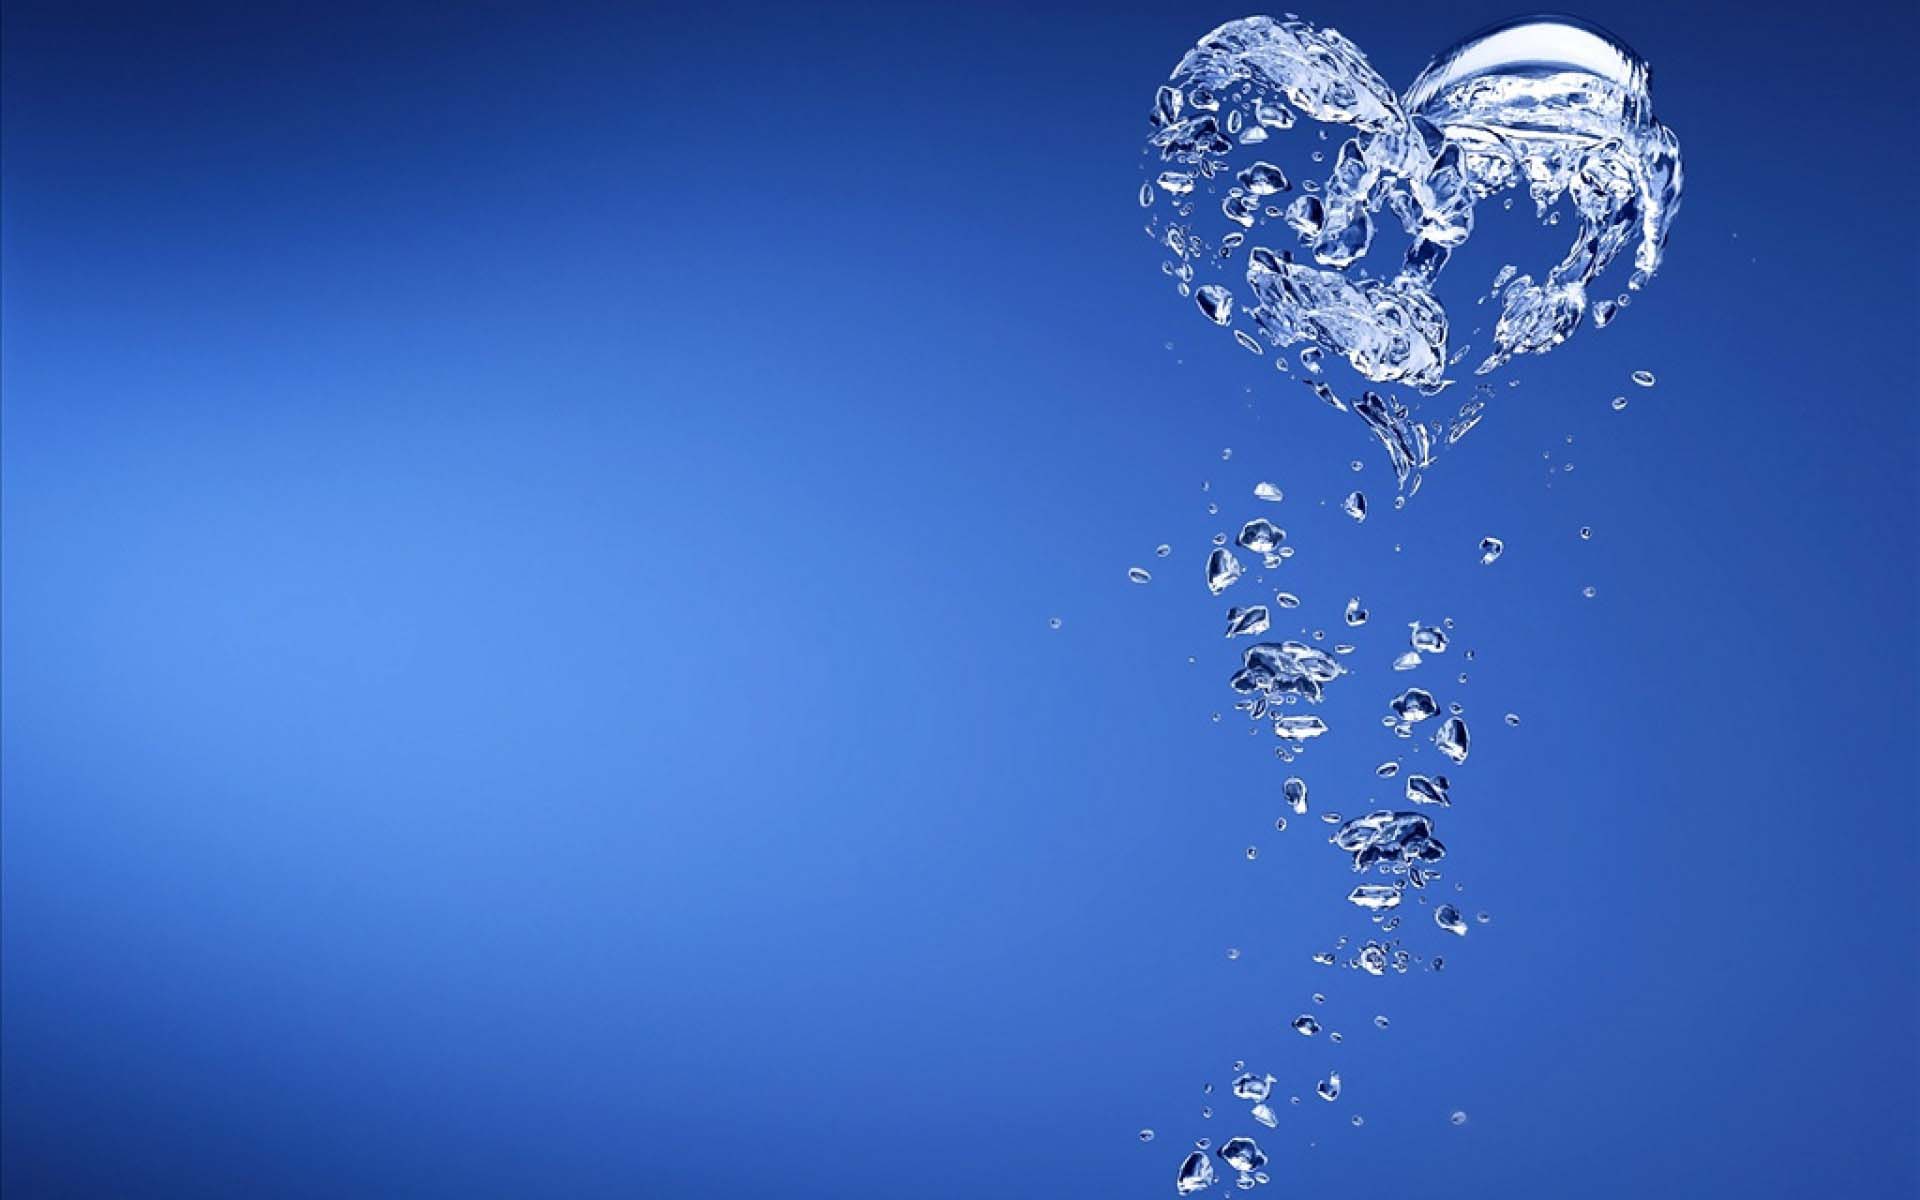 Water Background Wallpaper Image Pictures